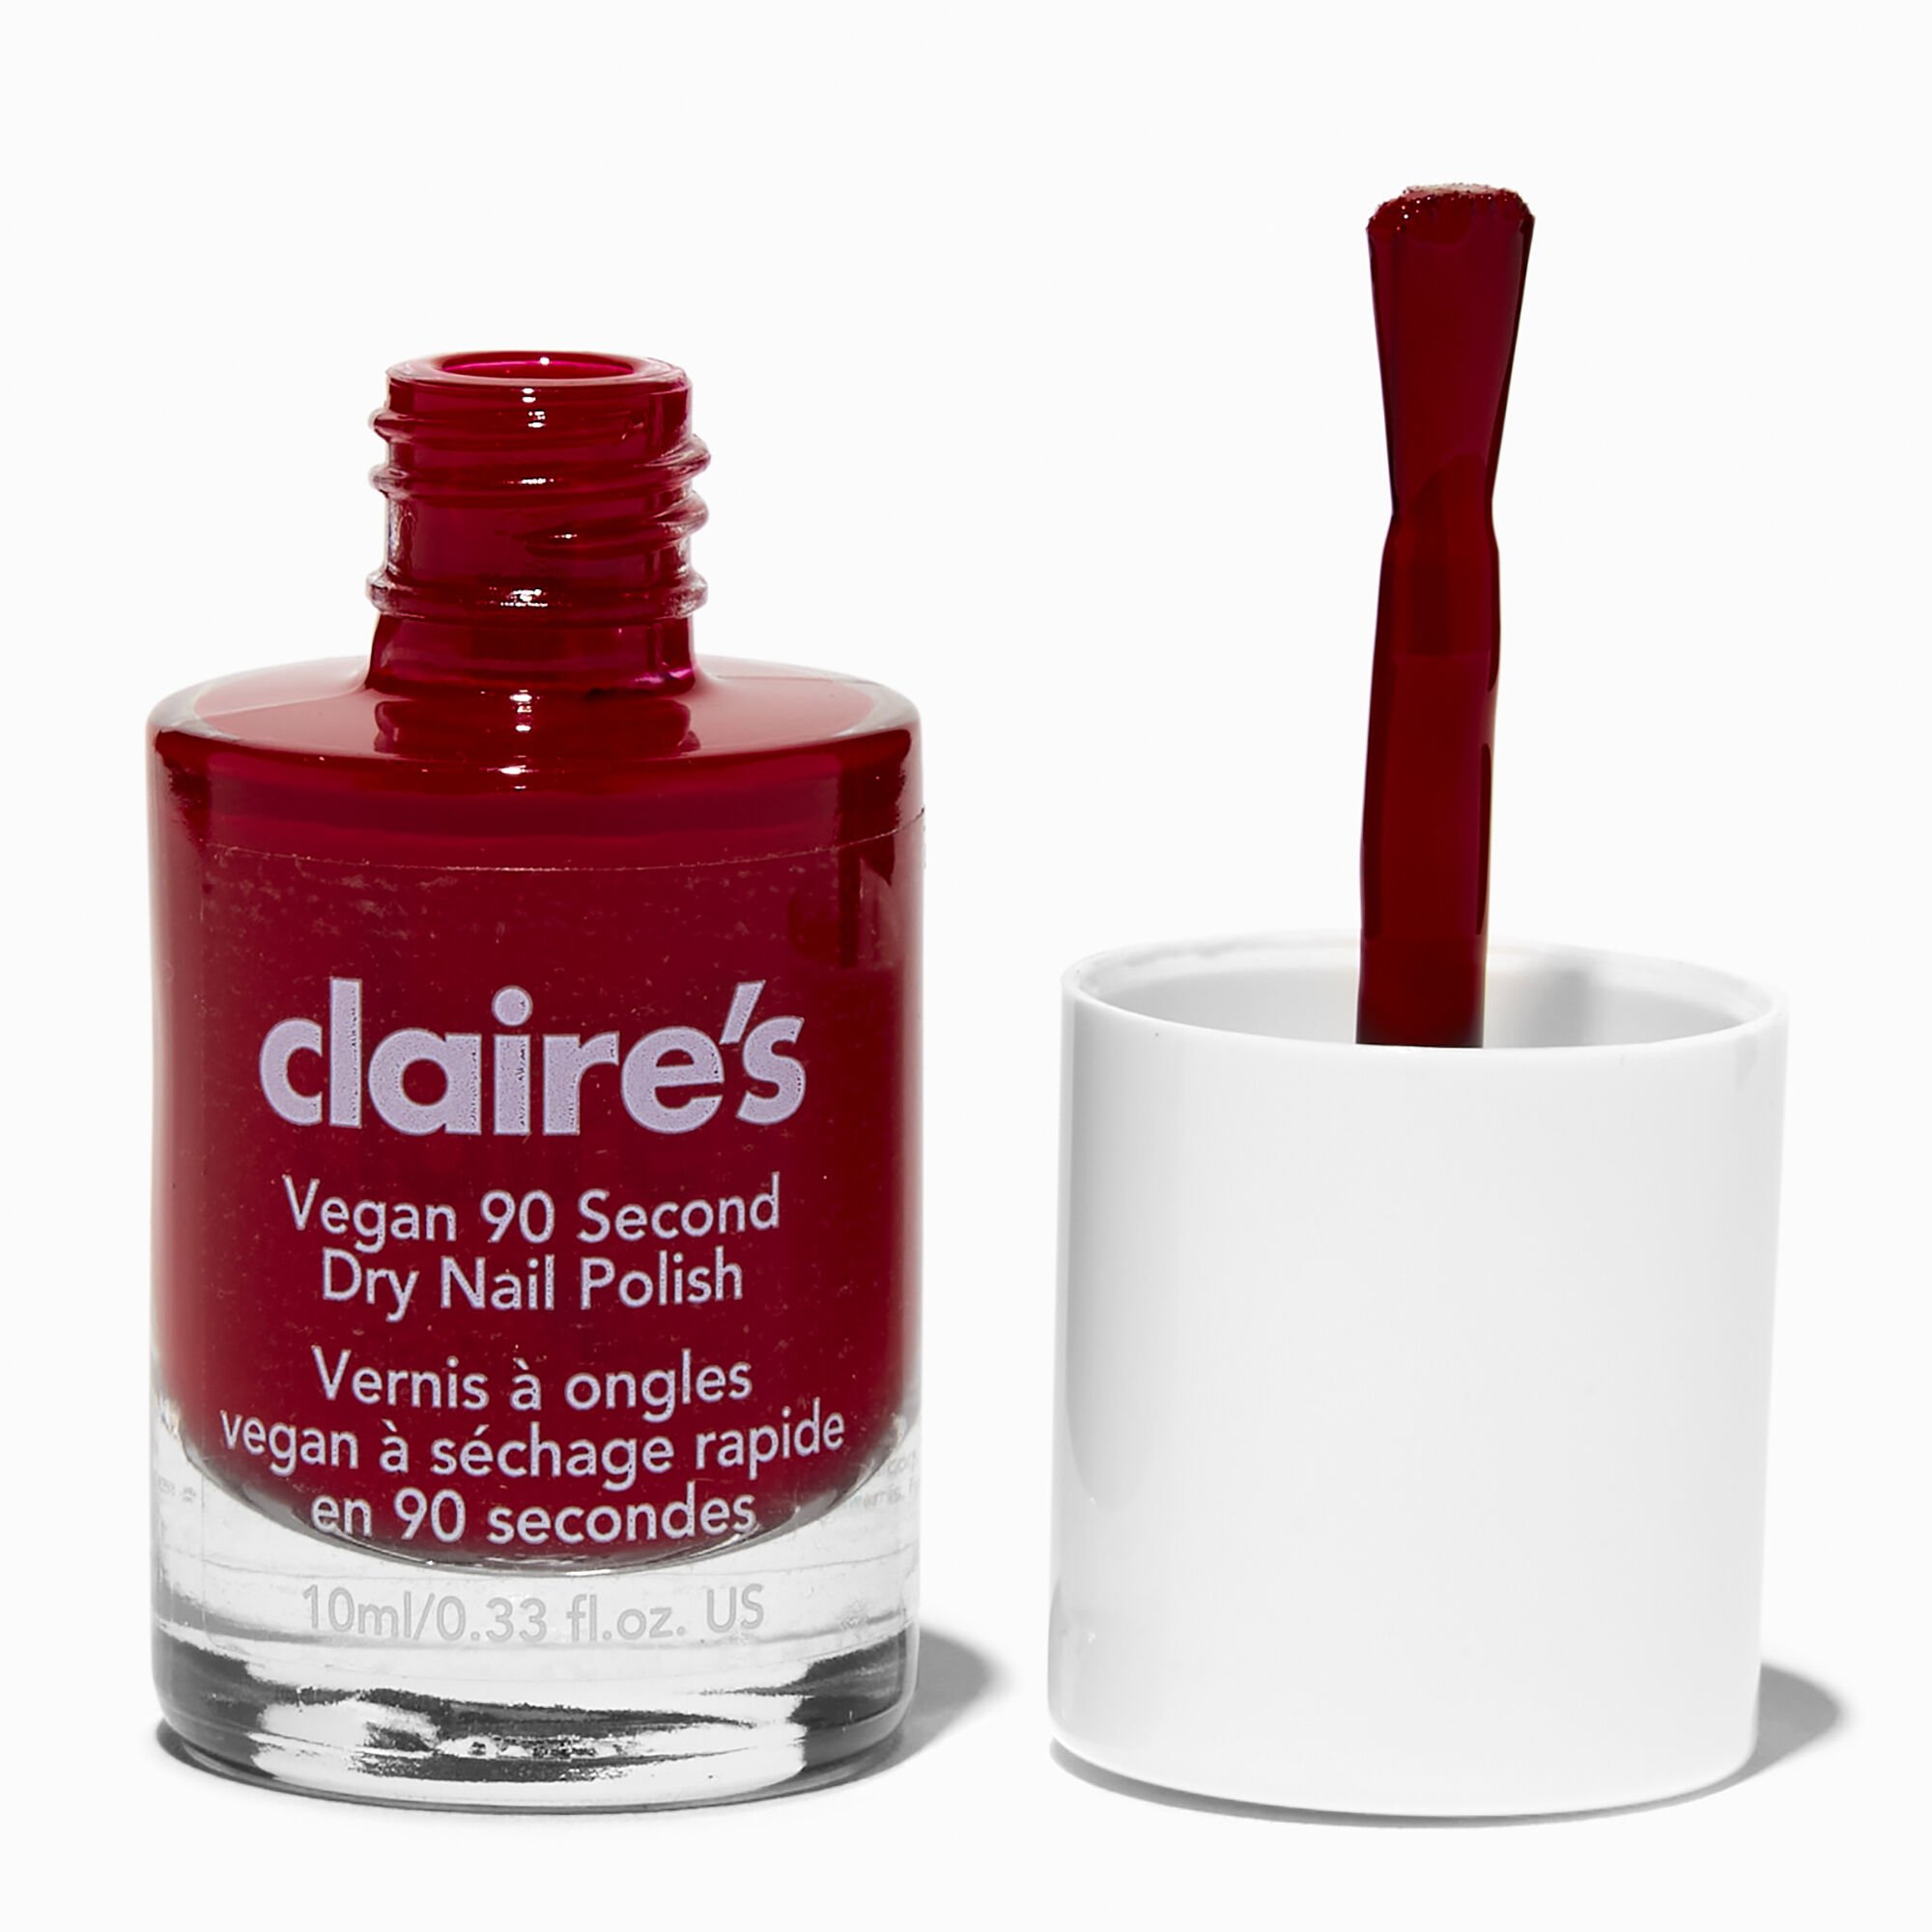 View Claires Vegan 90 Second Dry Nail Polish All My Love information